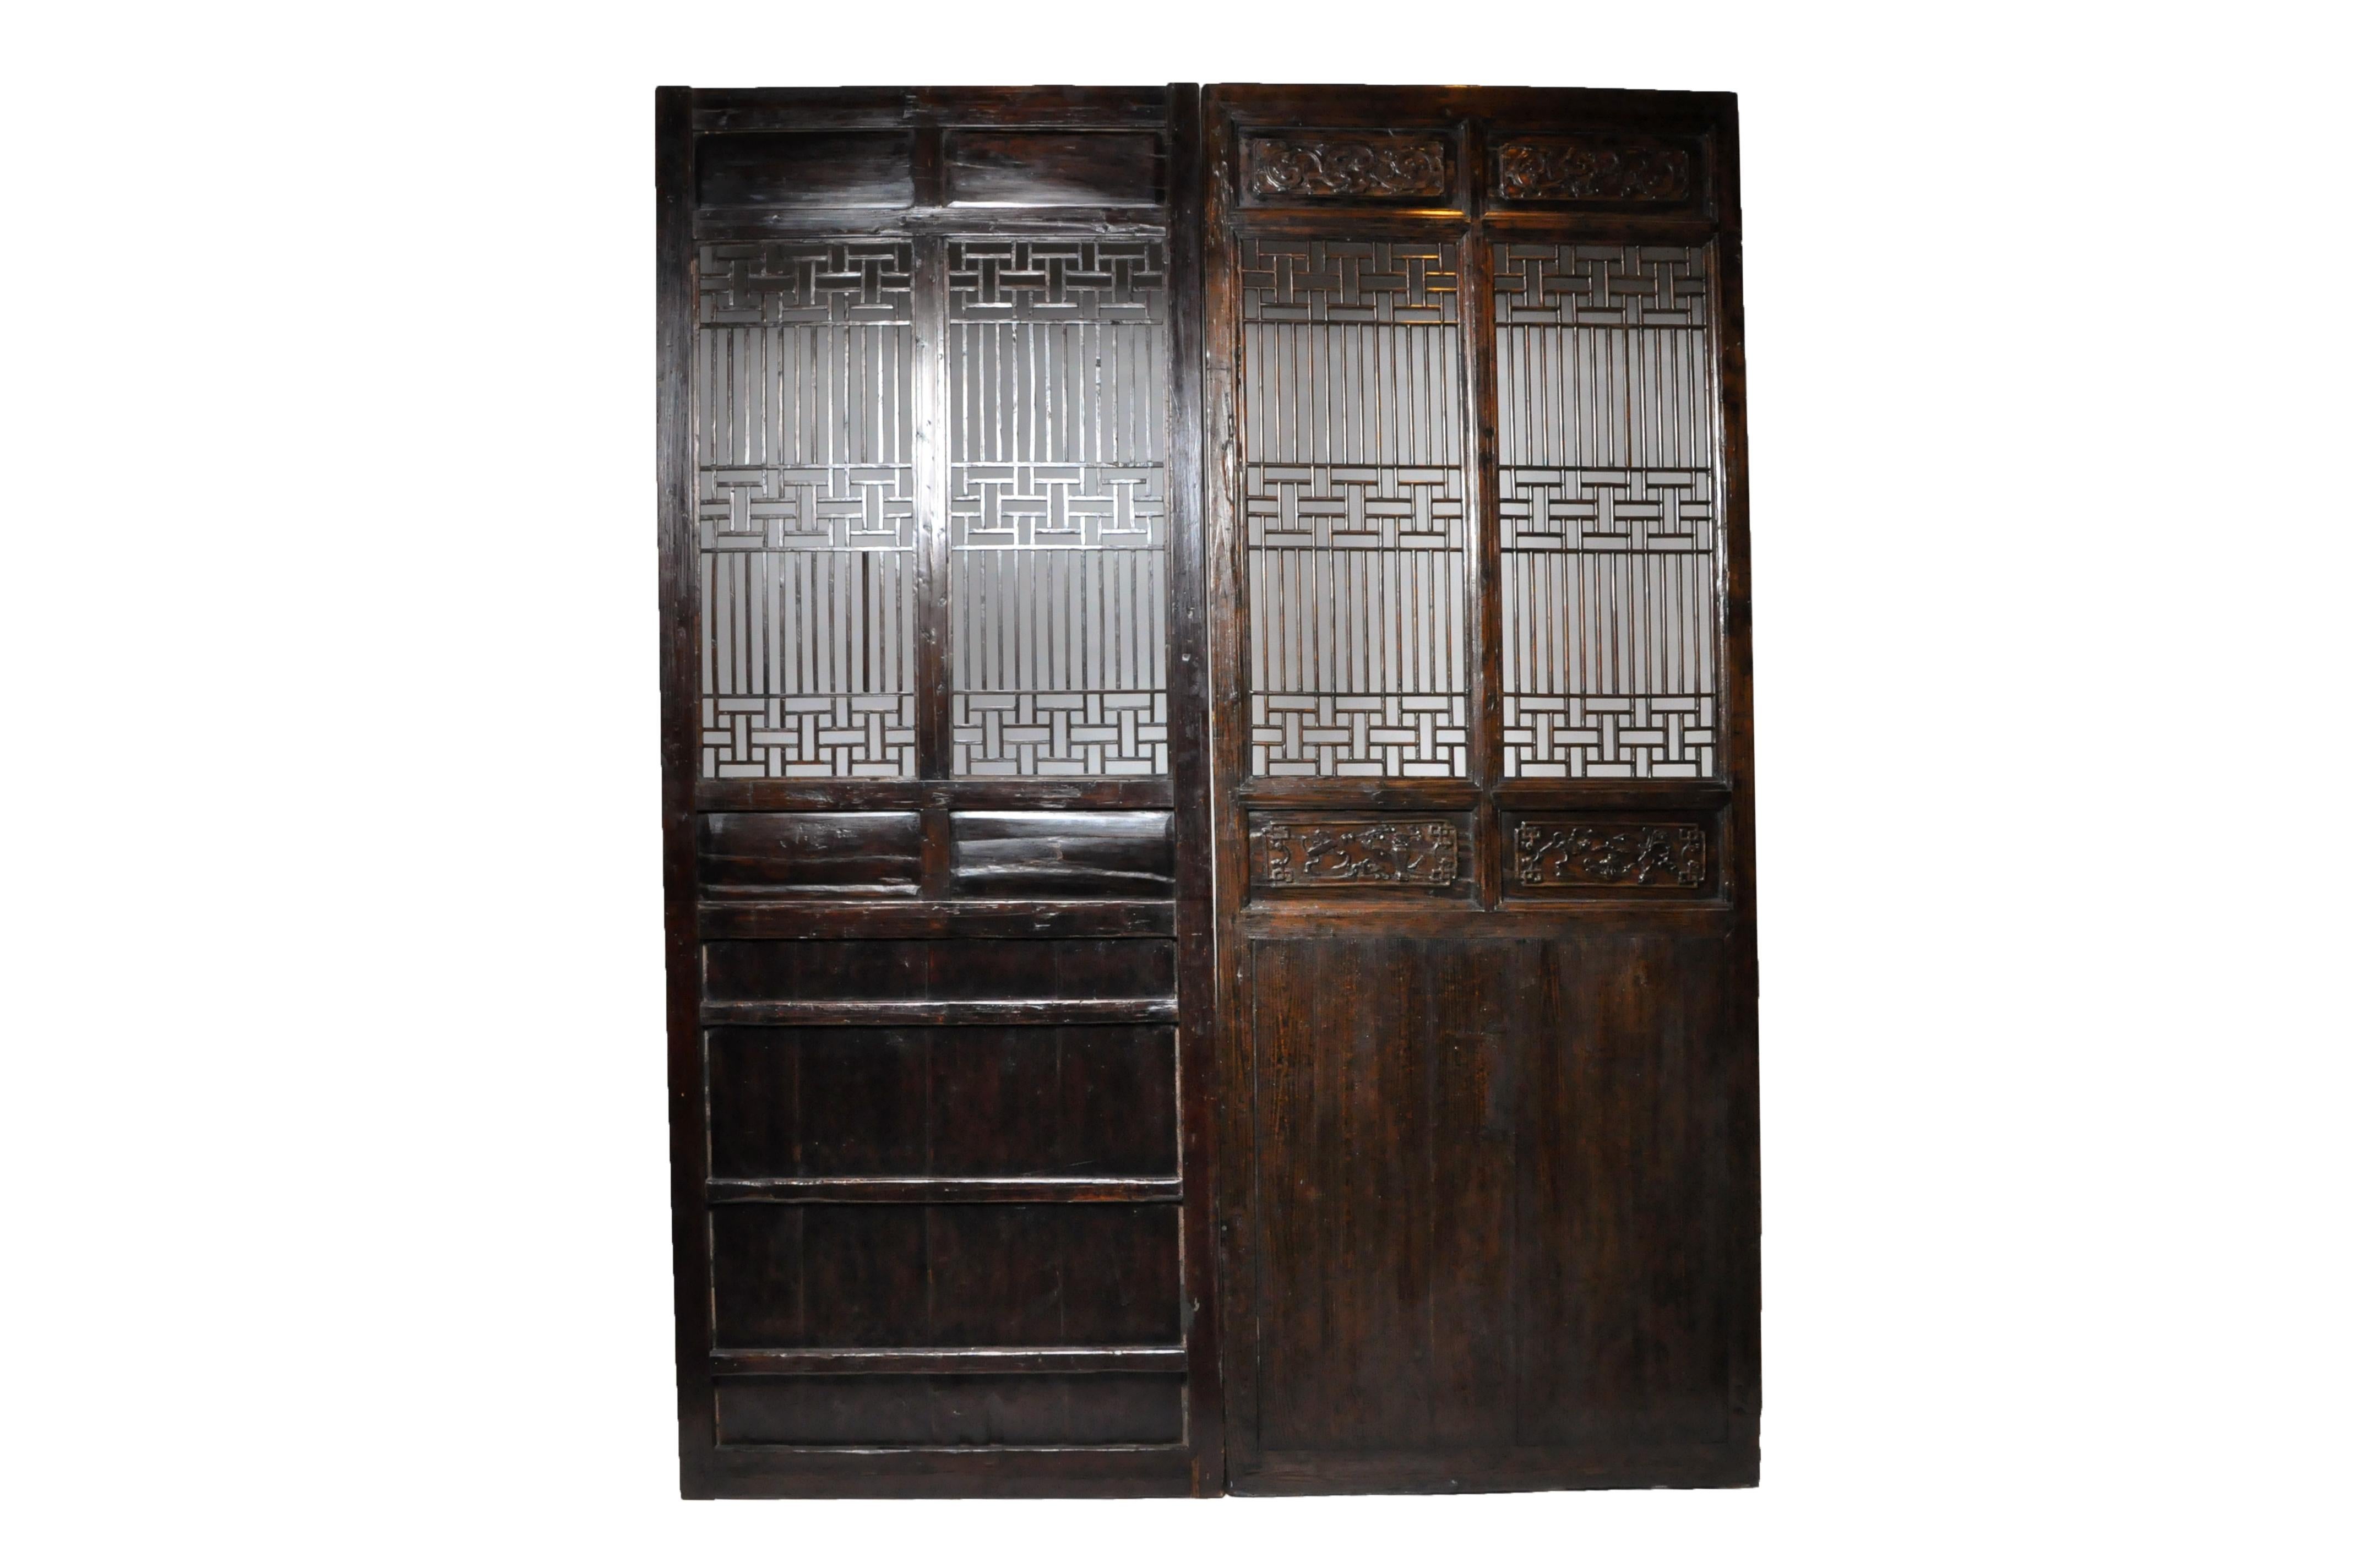 This pair of Chinese lattice panels were made from Fir wood and lacquer. They were found in Zhejiang in the early 1800s. Wear consistent with age and use.
   